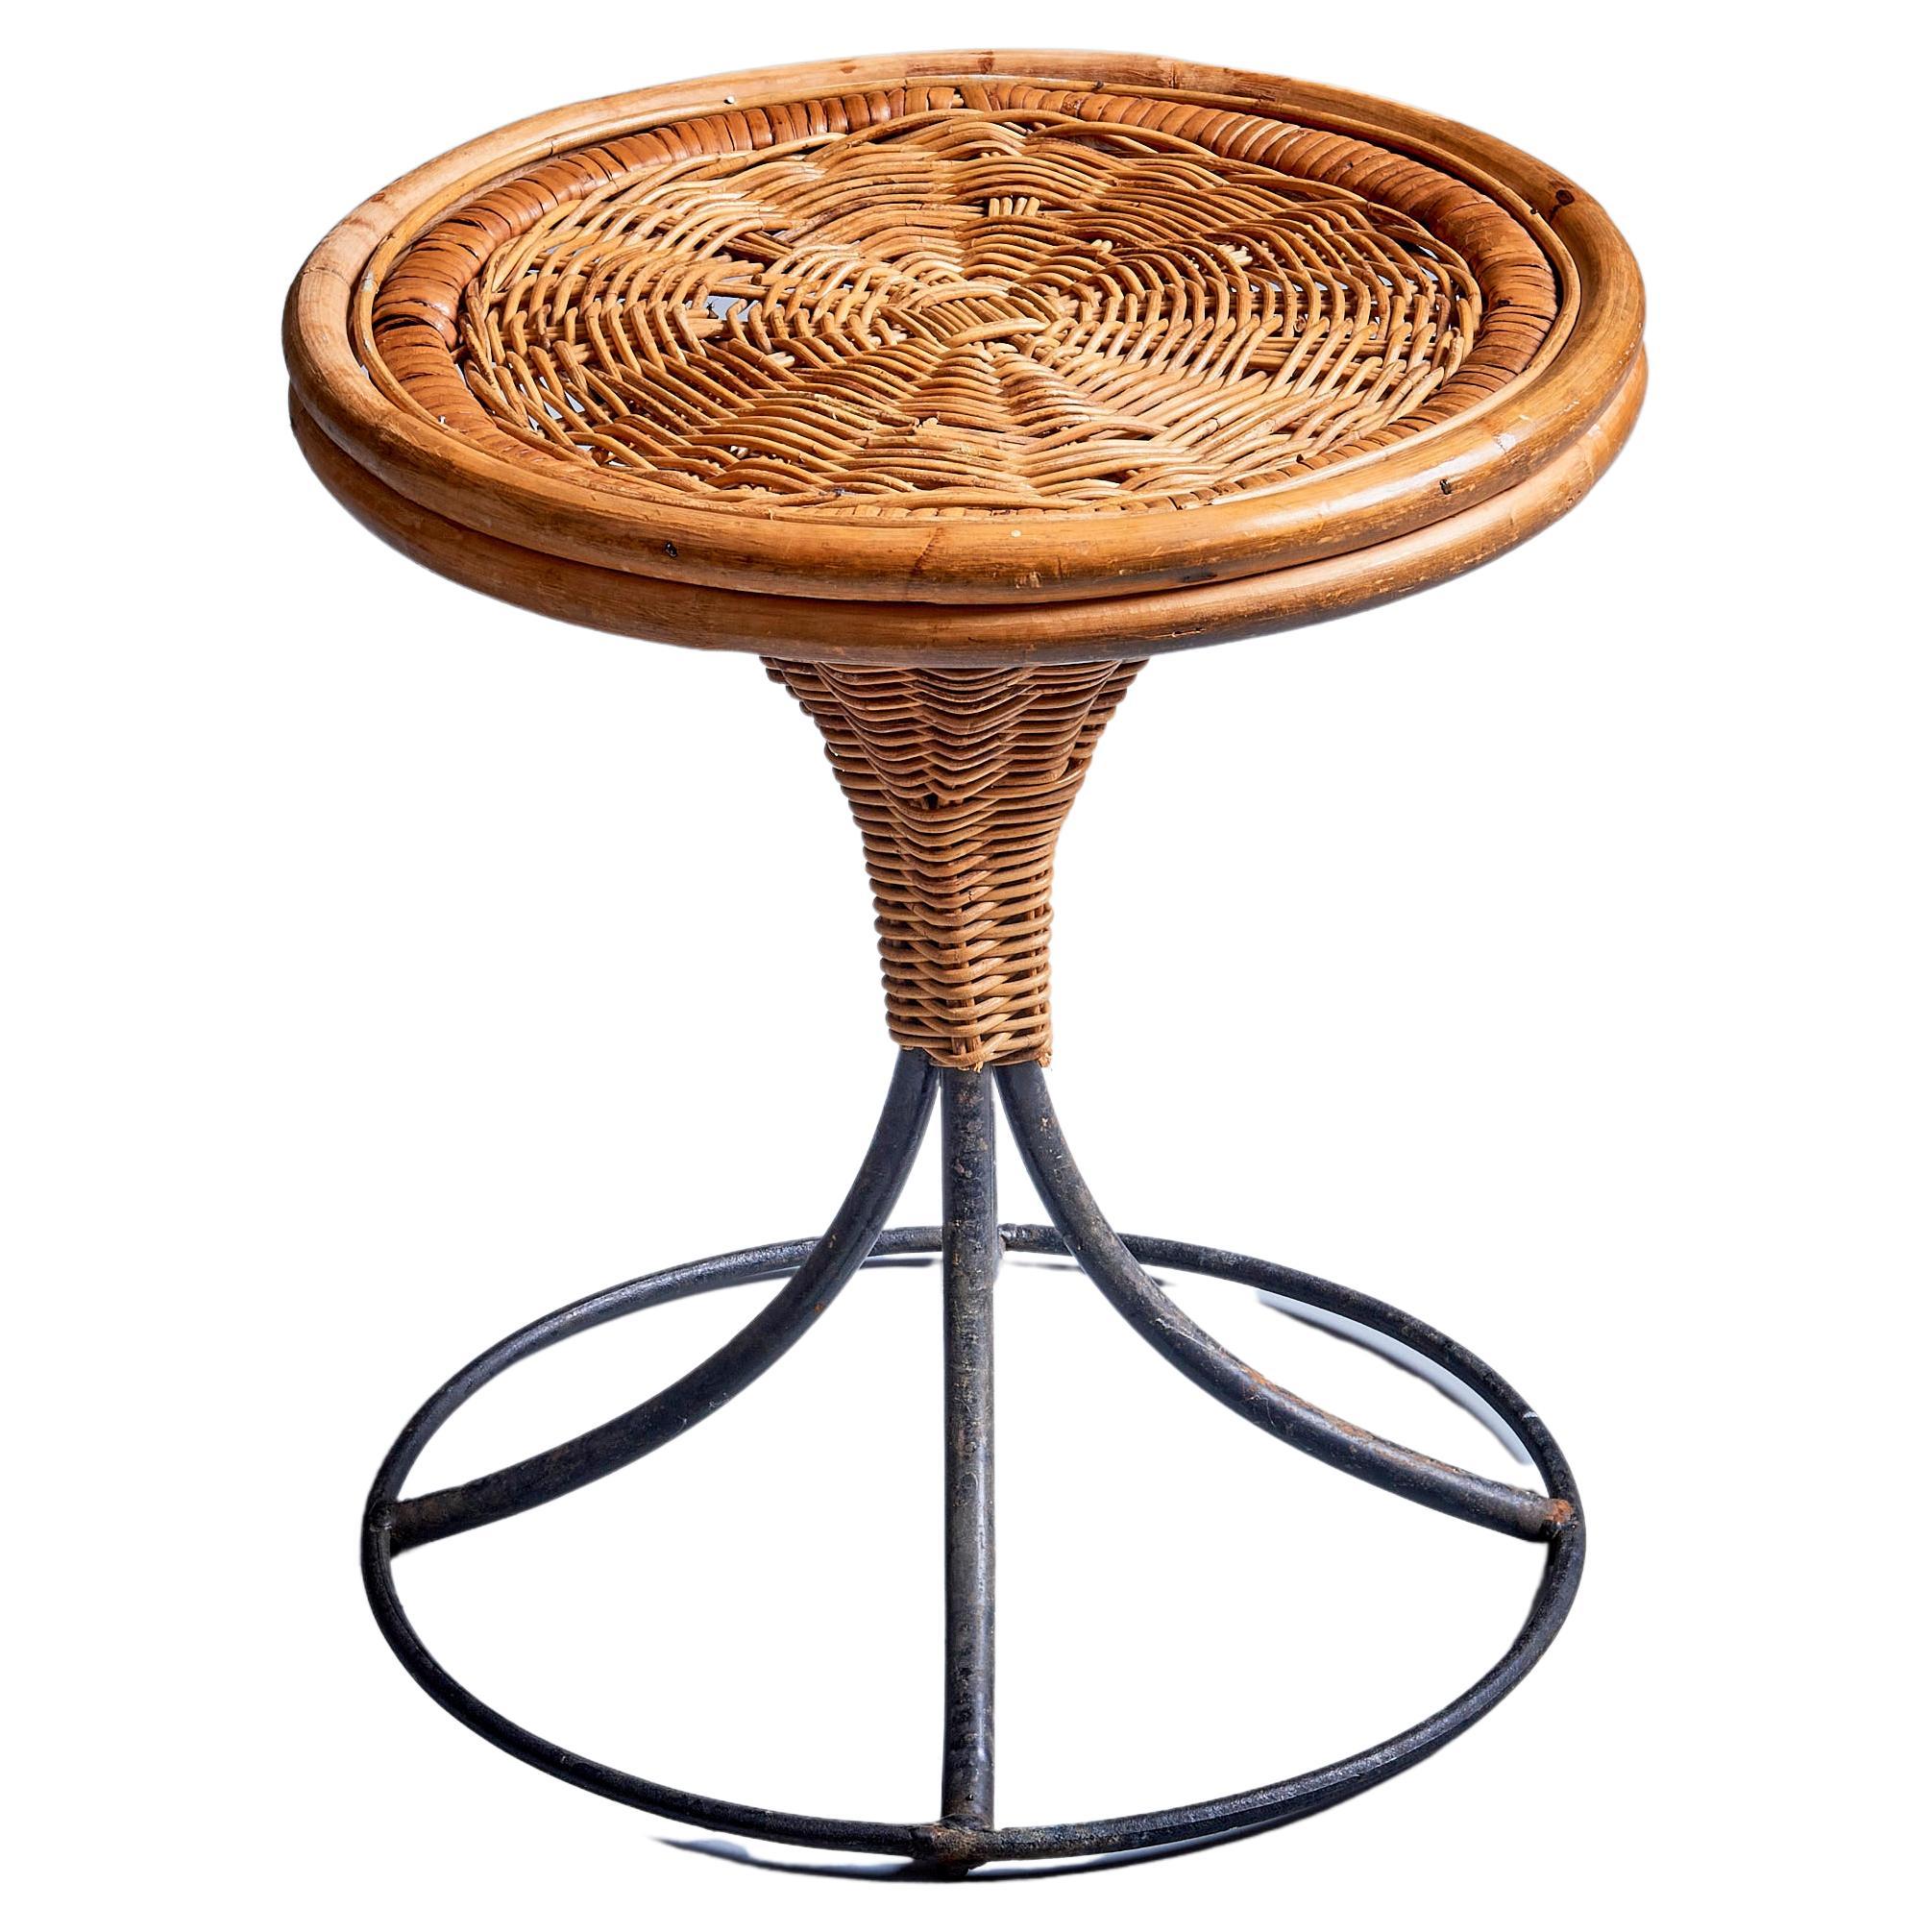 Danny Ho Fong stool in metal and wicker, USA - 1960s  For Sale